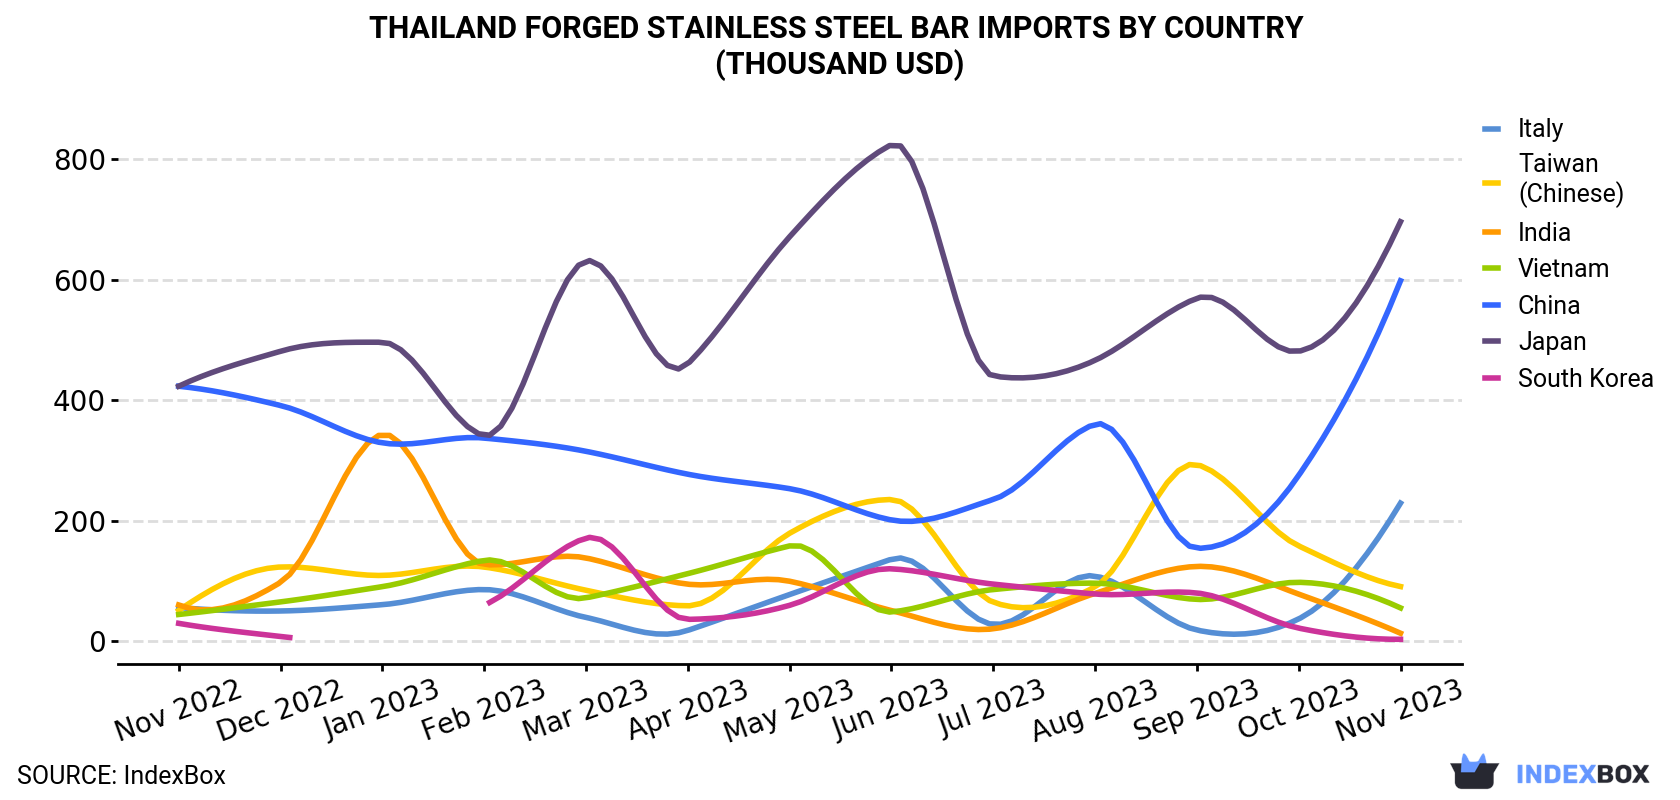 Thailand Forged Stainless Steel Bar Imports By Country (Thousand USD)